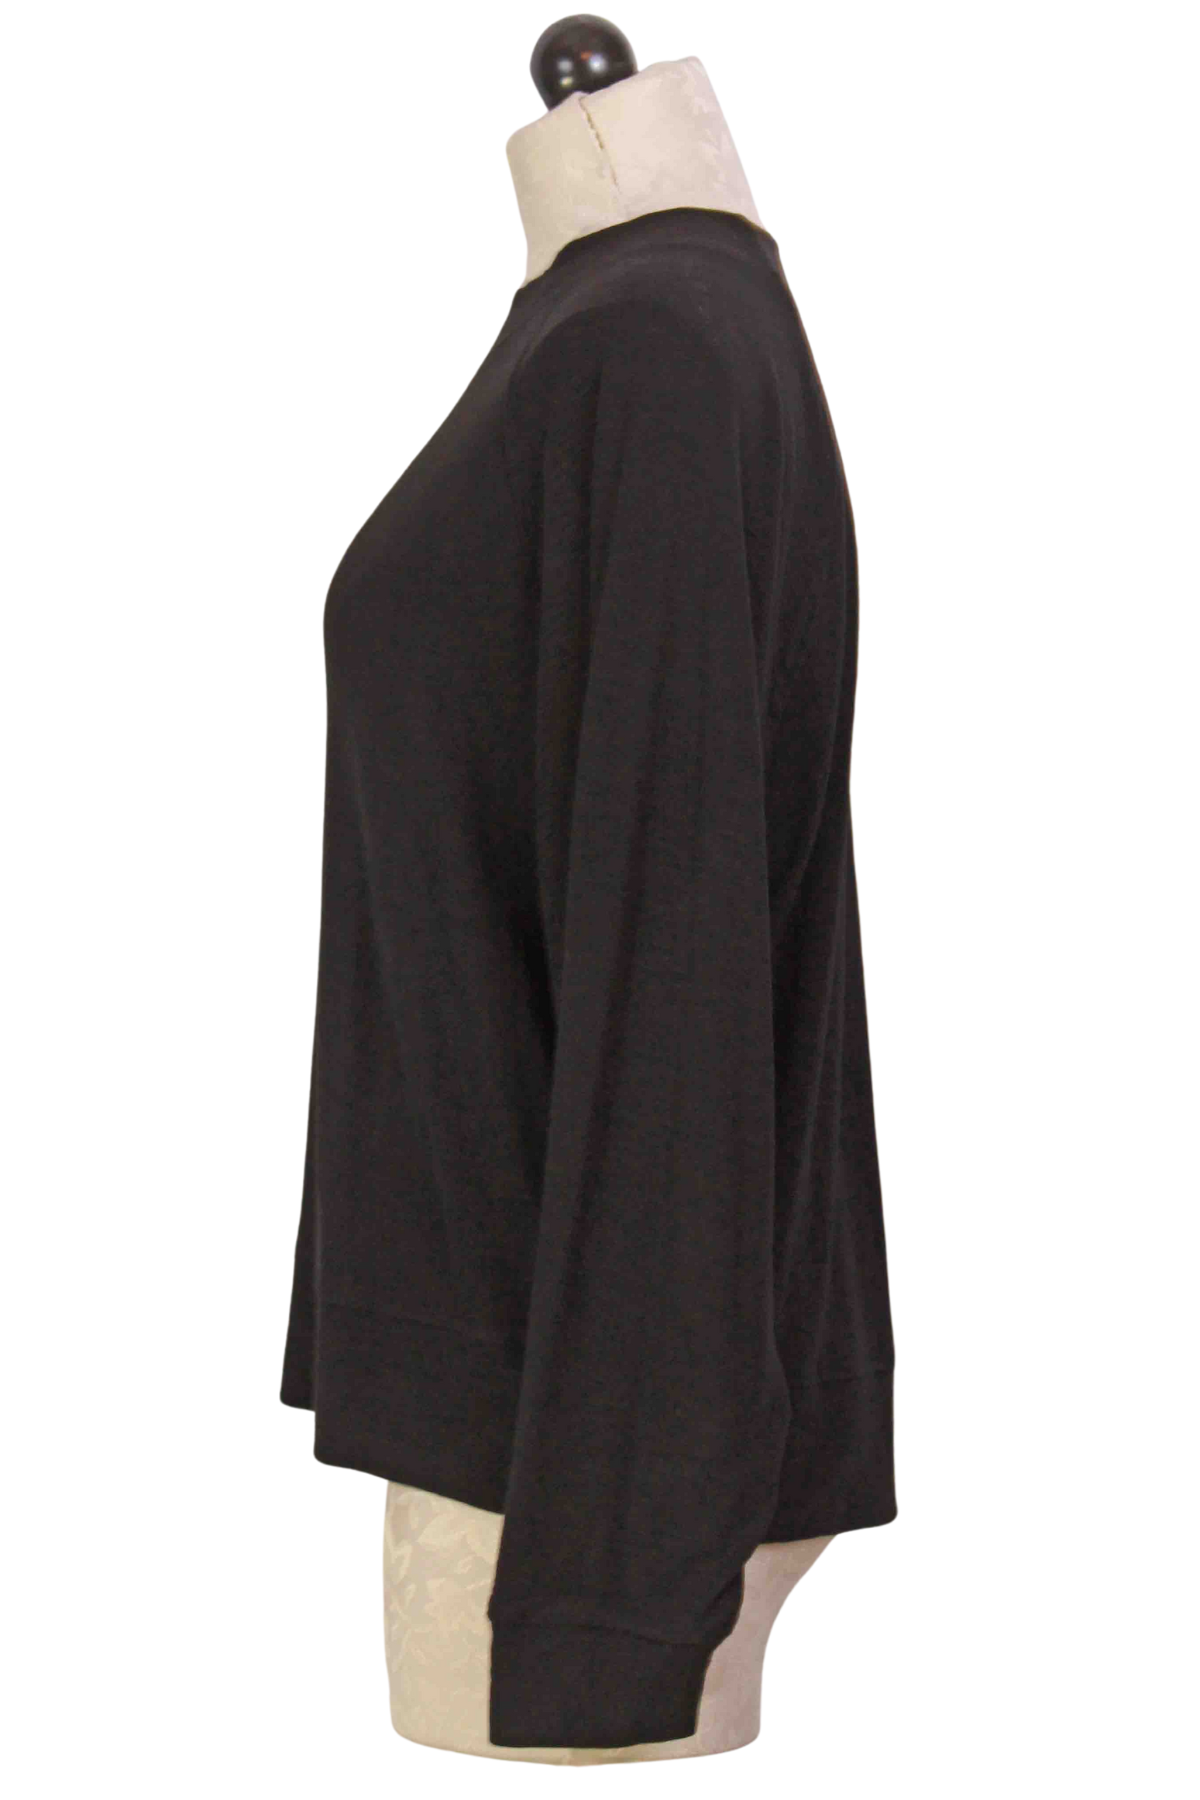 side view of Black Deep Hem and Neckline Top by Nally and Millie